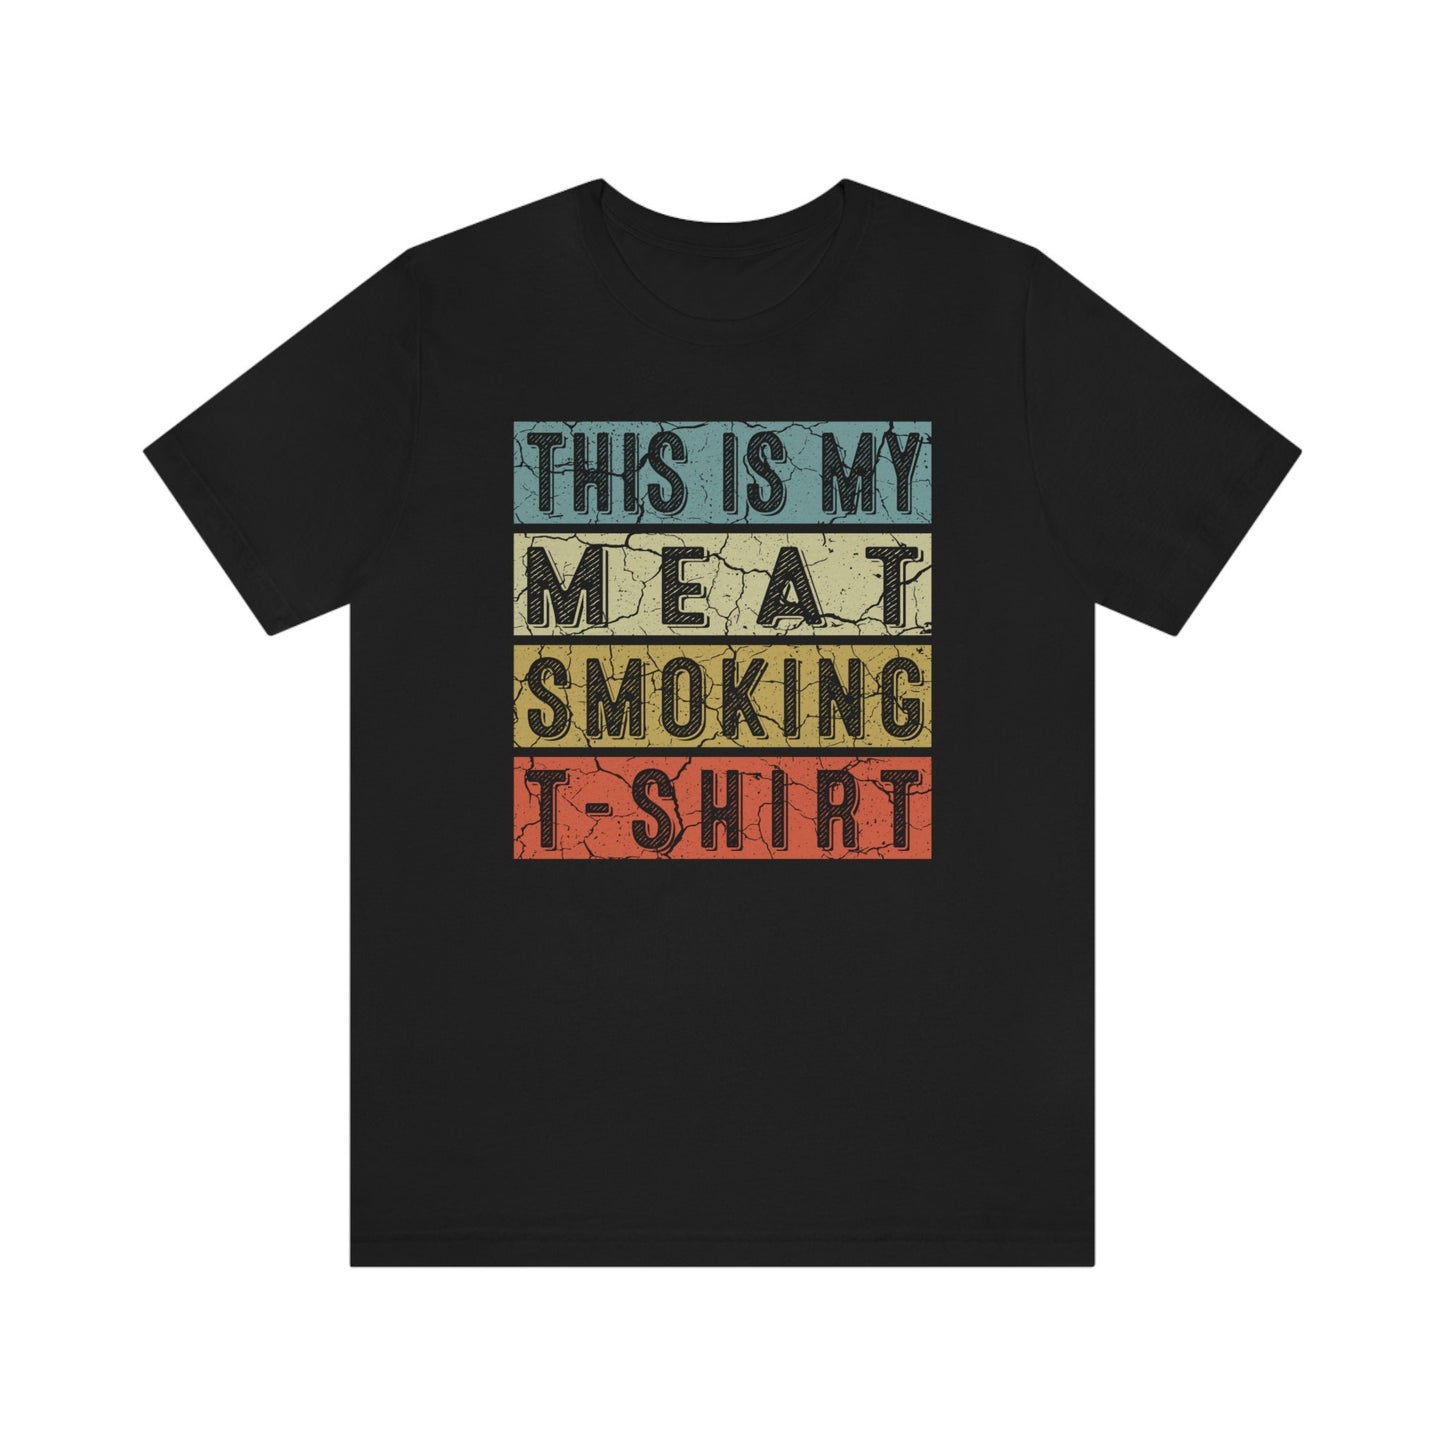 This is My Meat Smoking t-shirt - great gift for smoker who loves to cook cool brisket